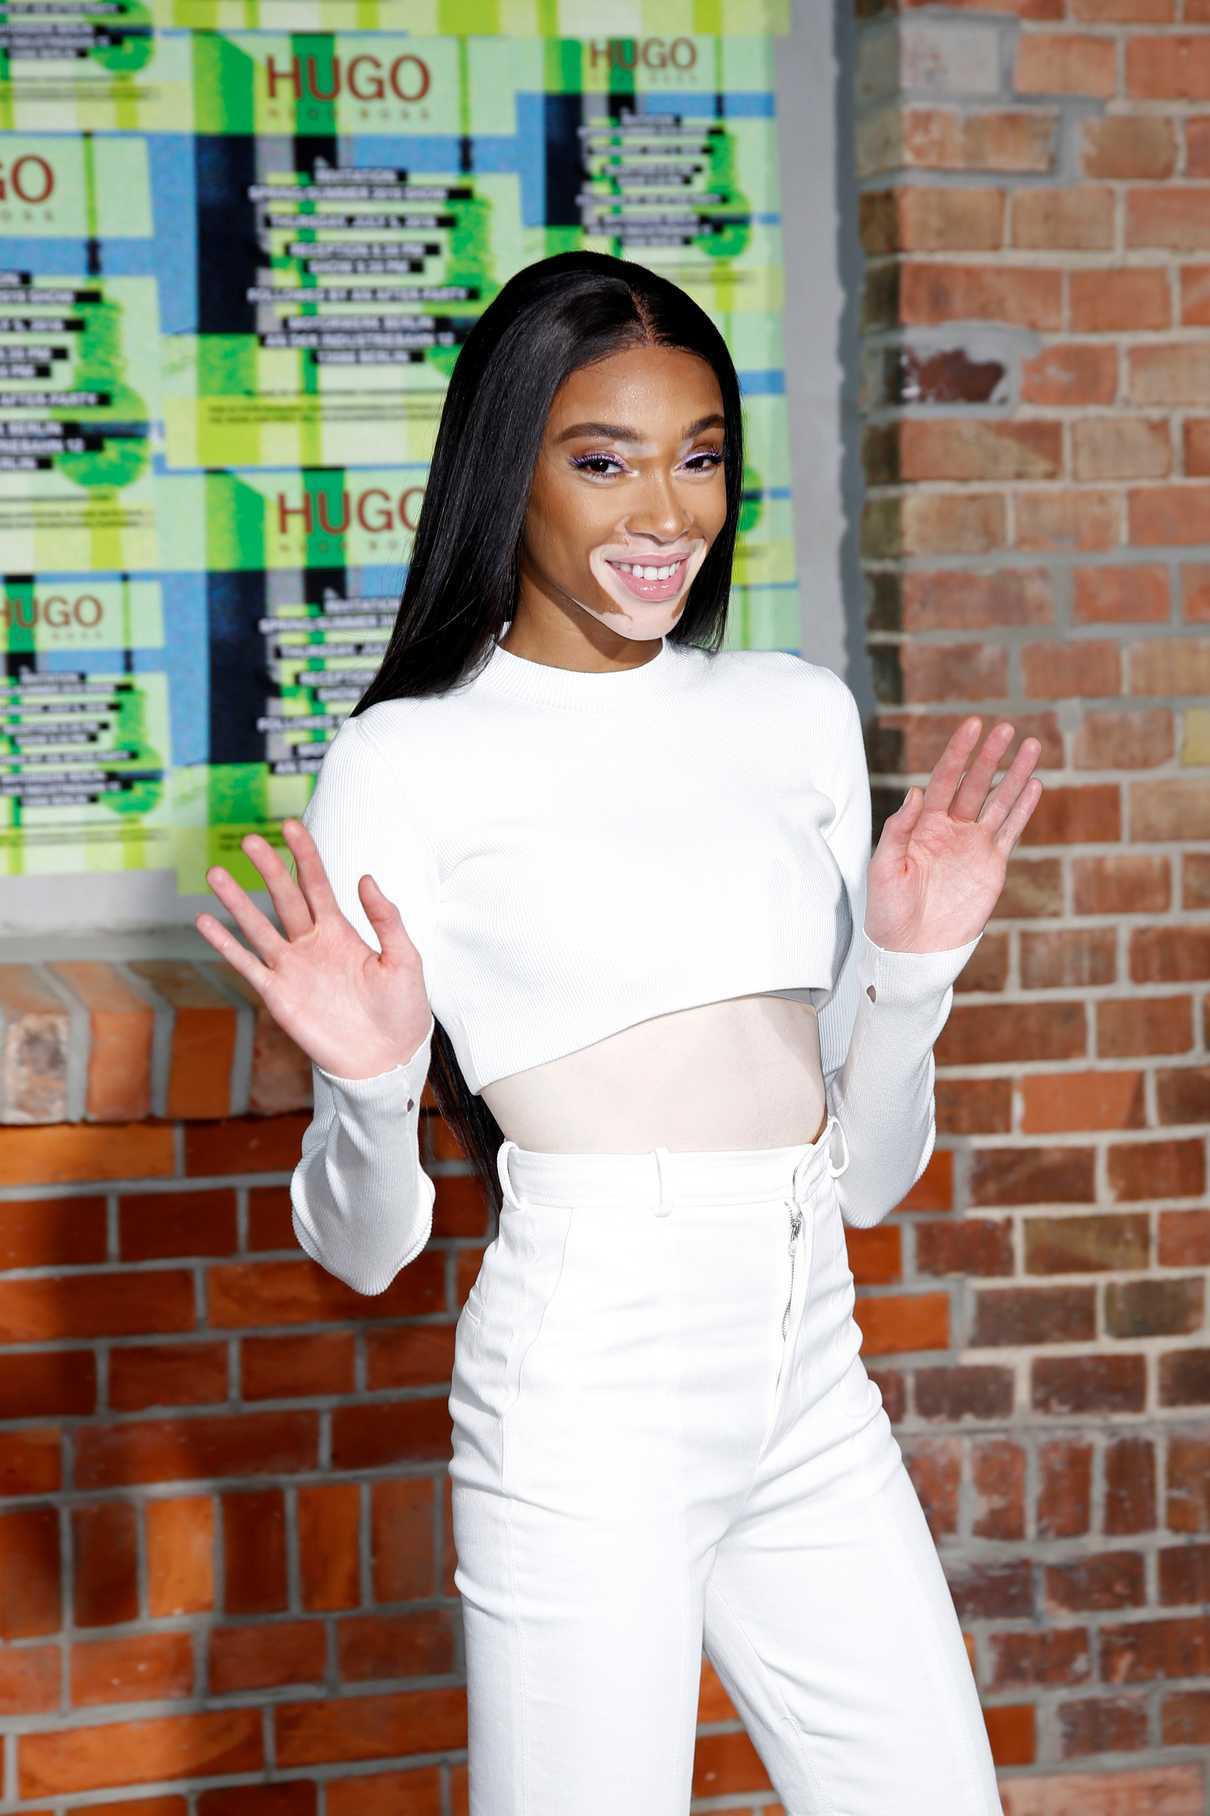 Winnie Harlow Attends the Hugo Boss Show During the Mercedes-Benz Fashion Week in Berlin 07/05/2018-4